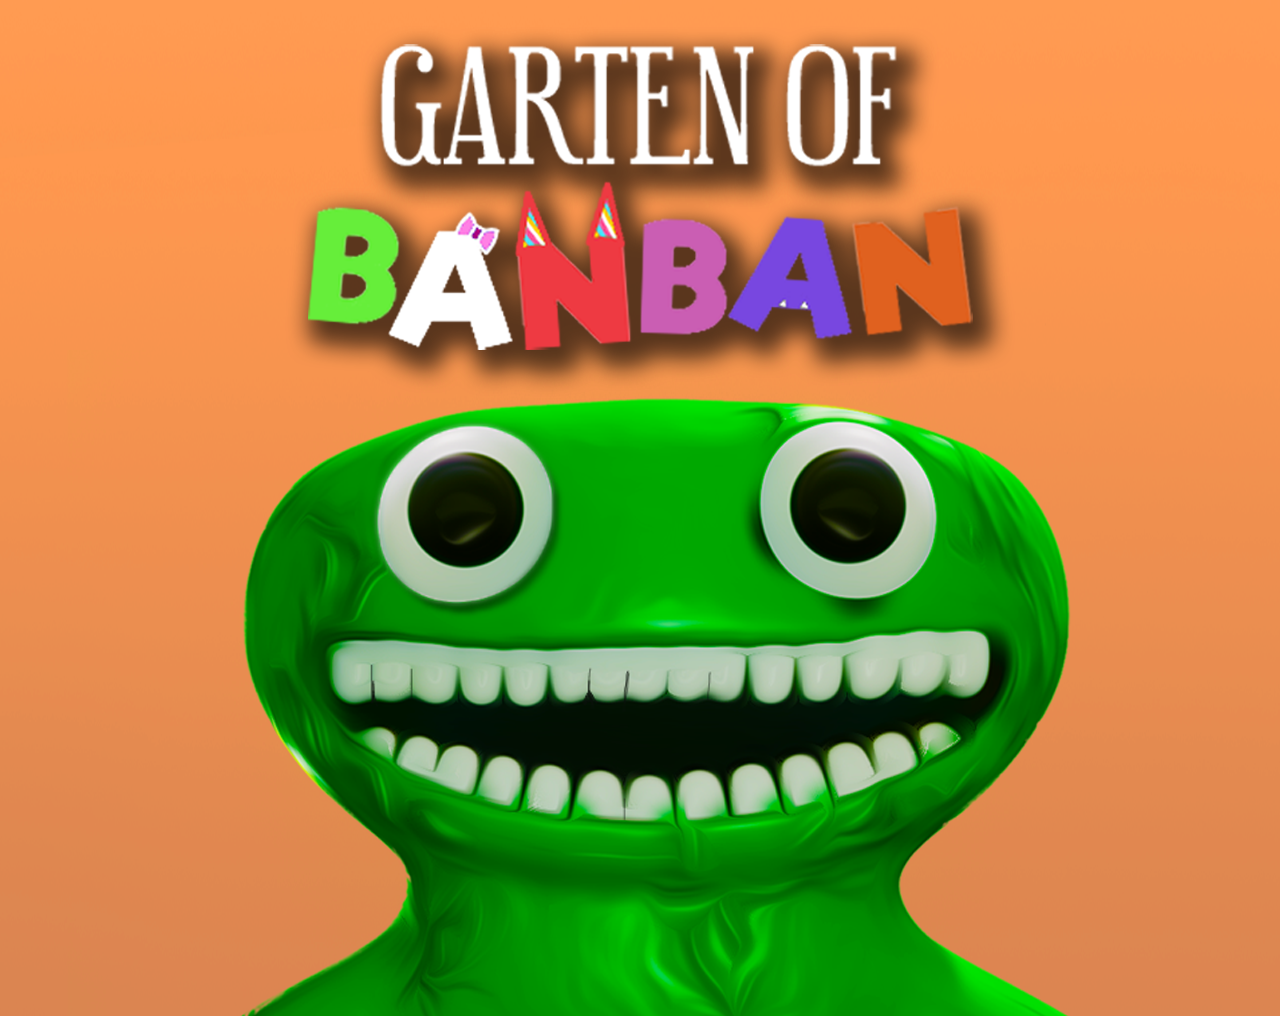 Since I know how much Josh loves Garten of Banban heres my awesome